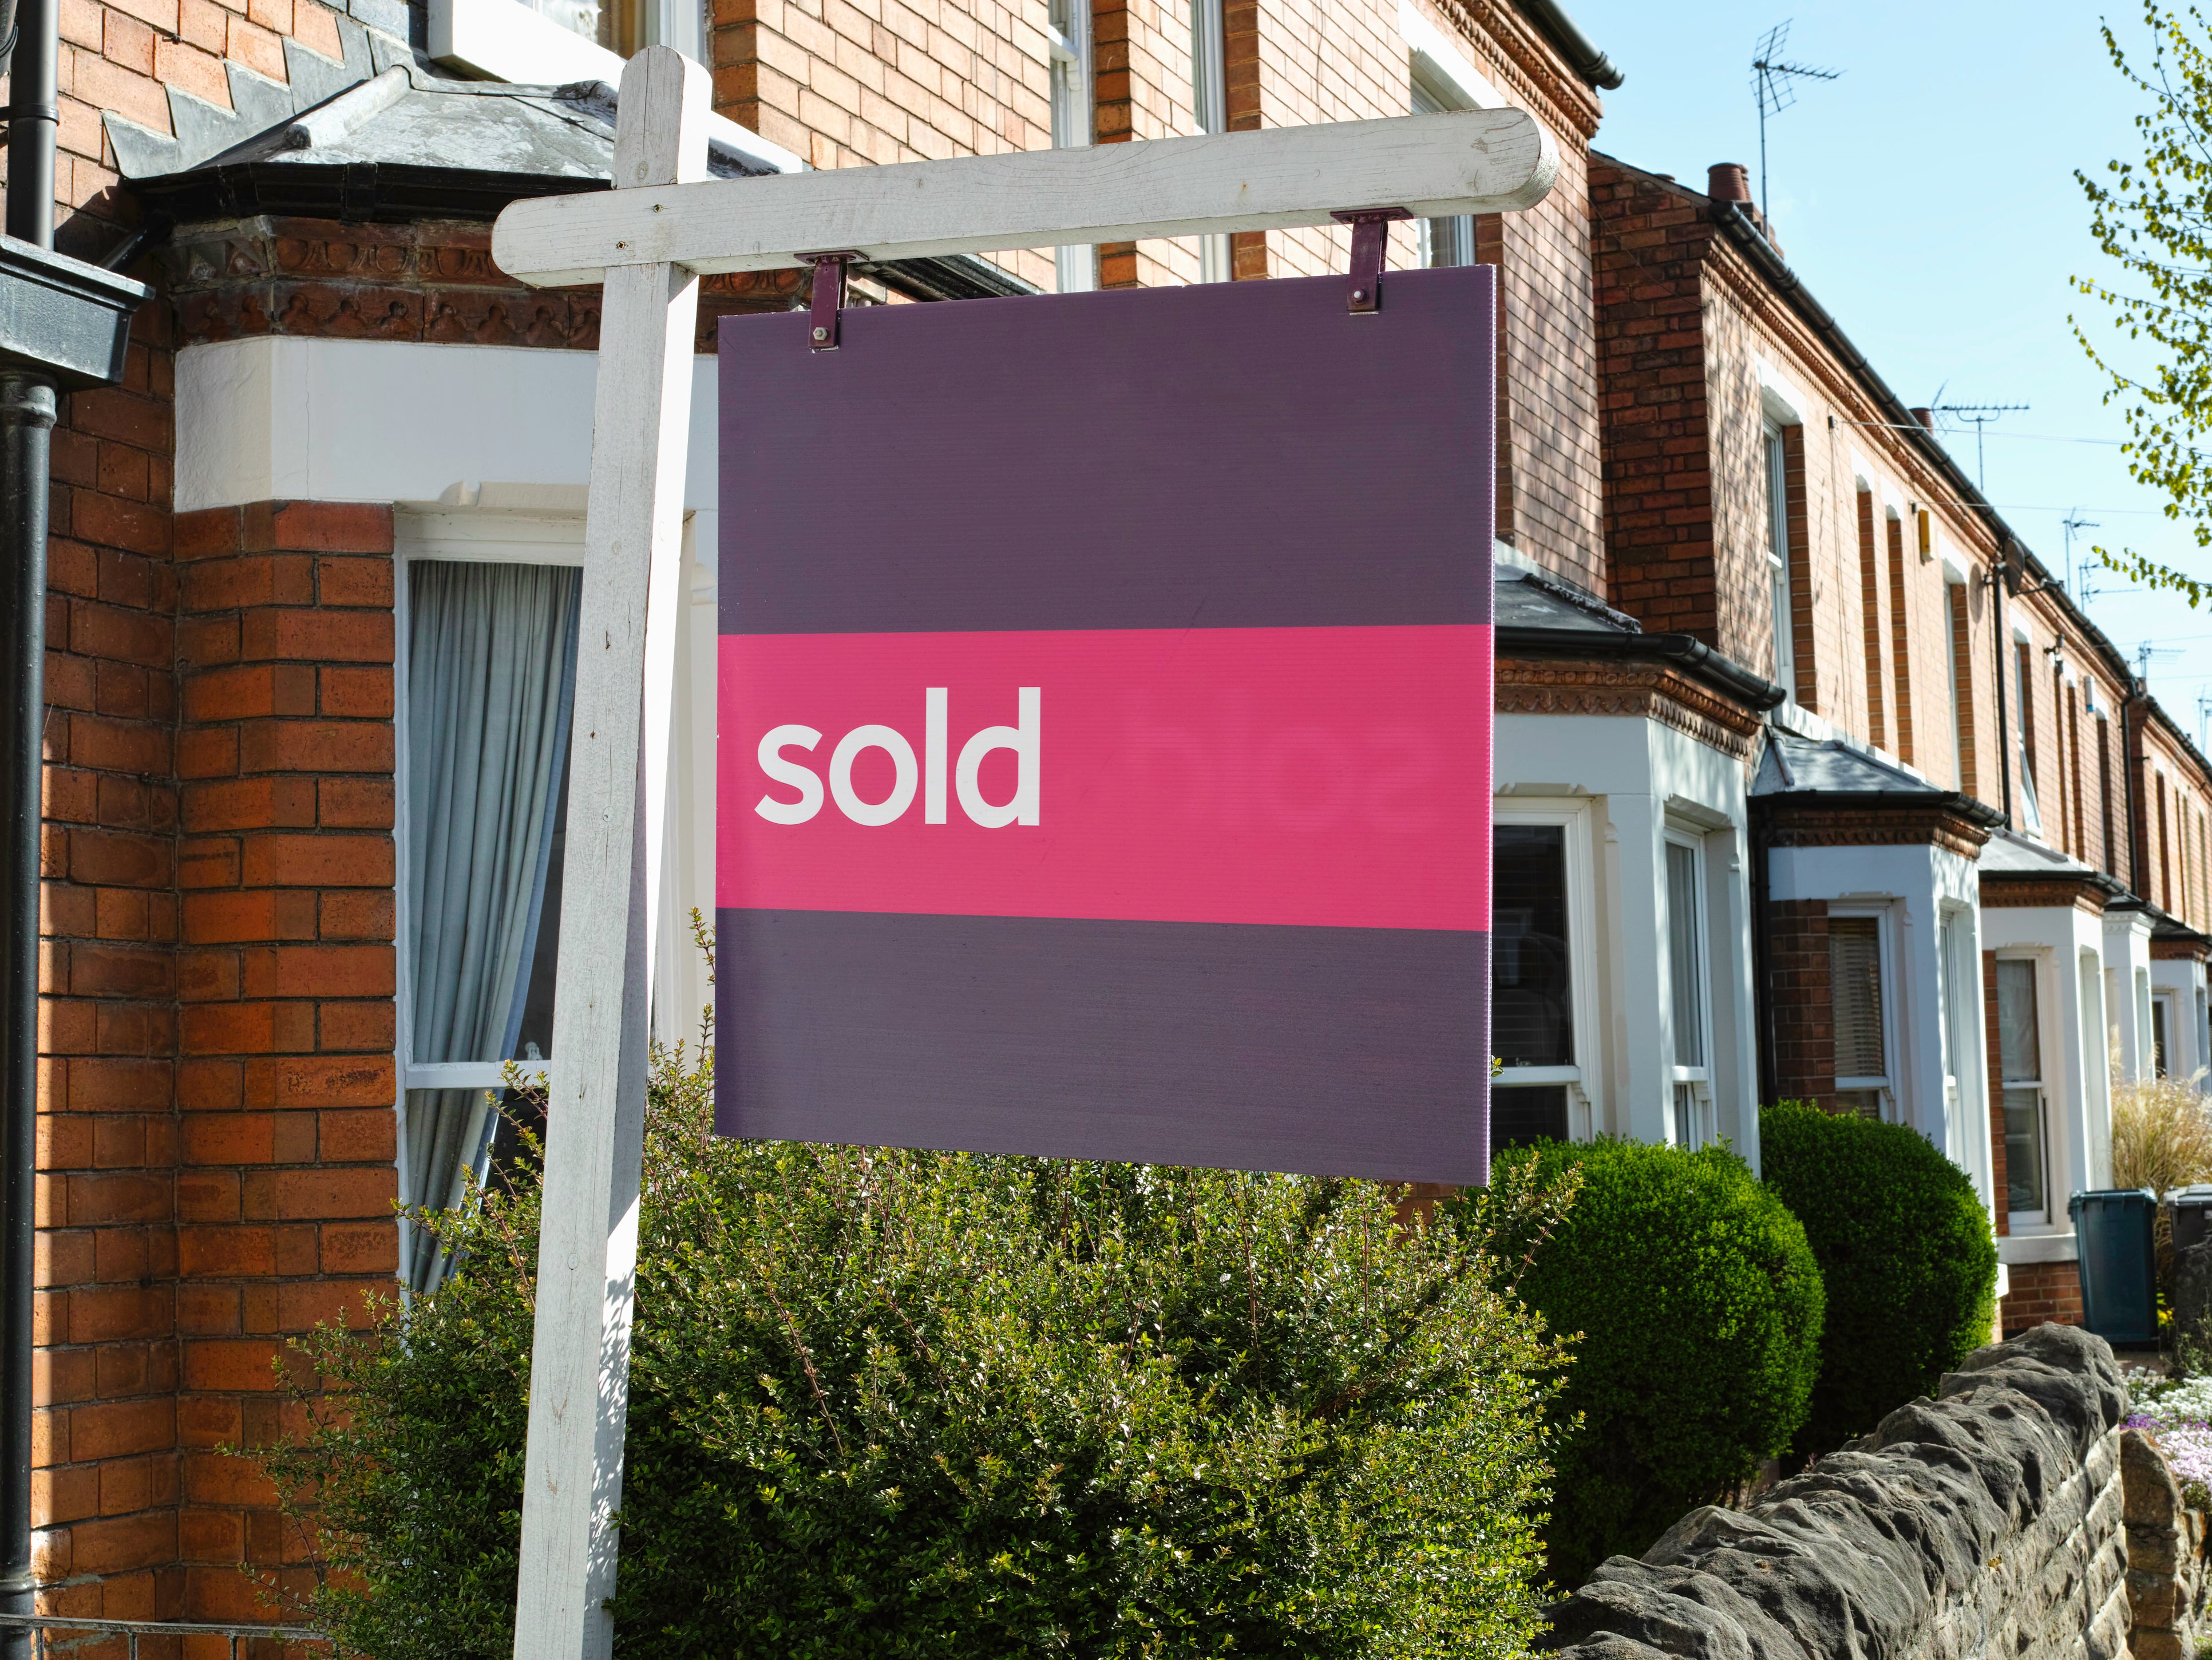 House sales surged to a record high in June as buyers rushed to beat the stamp duty deadline